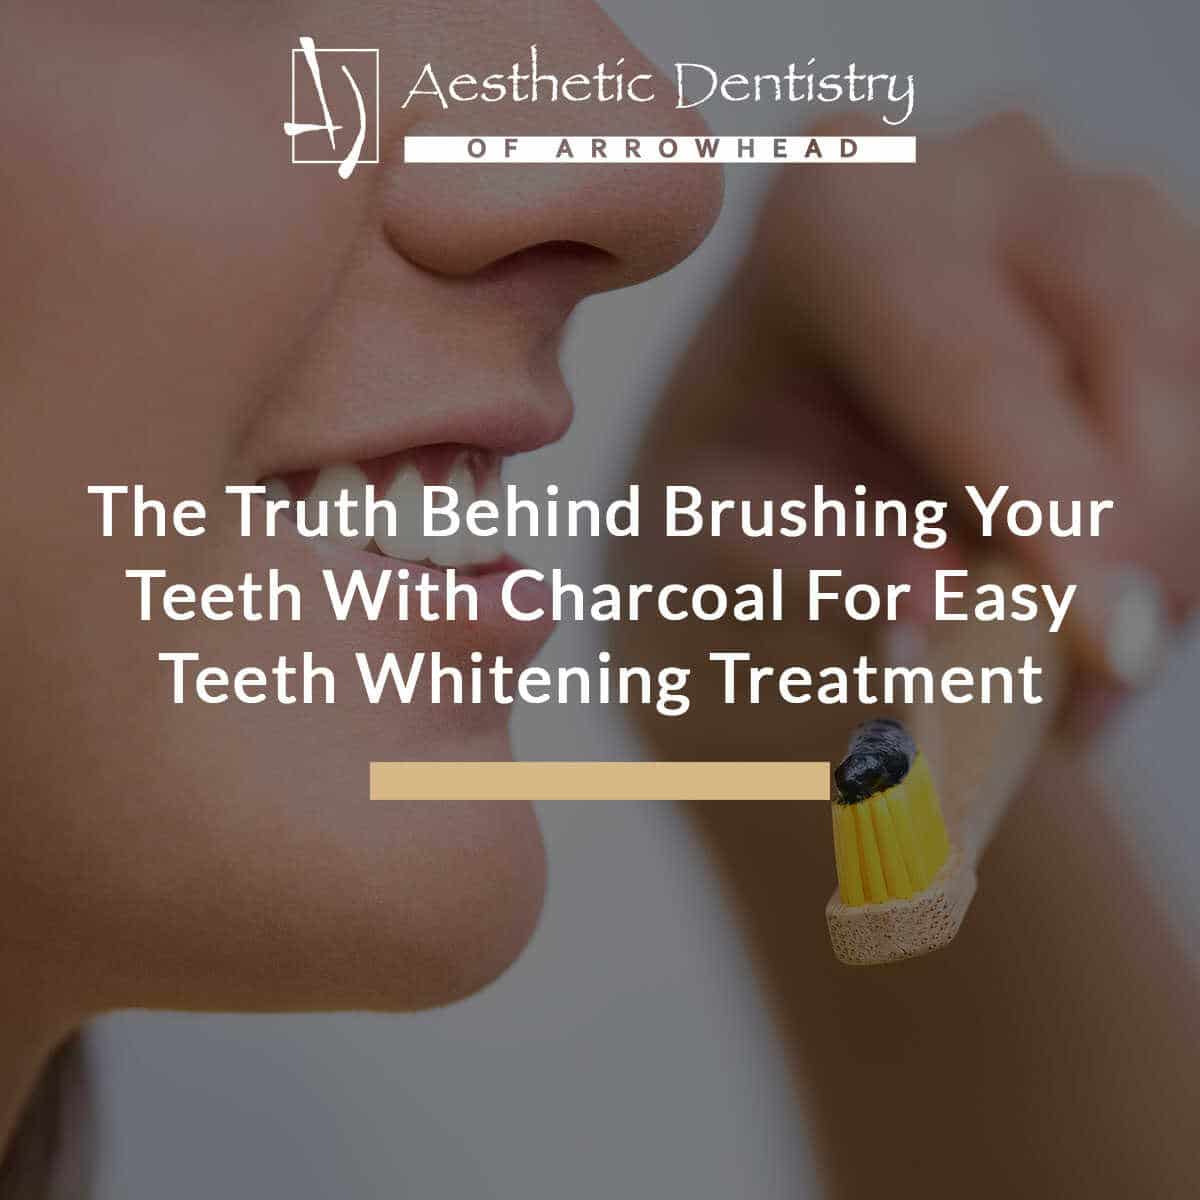 The Truth Behind Brushing Your Teeth With Charcoal For Easy Teeth Whitening Treatment